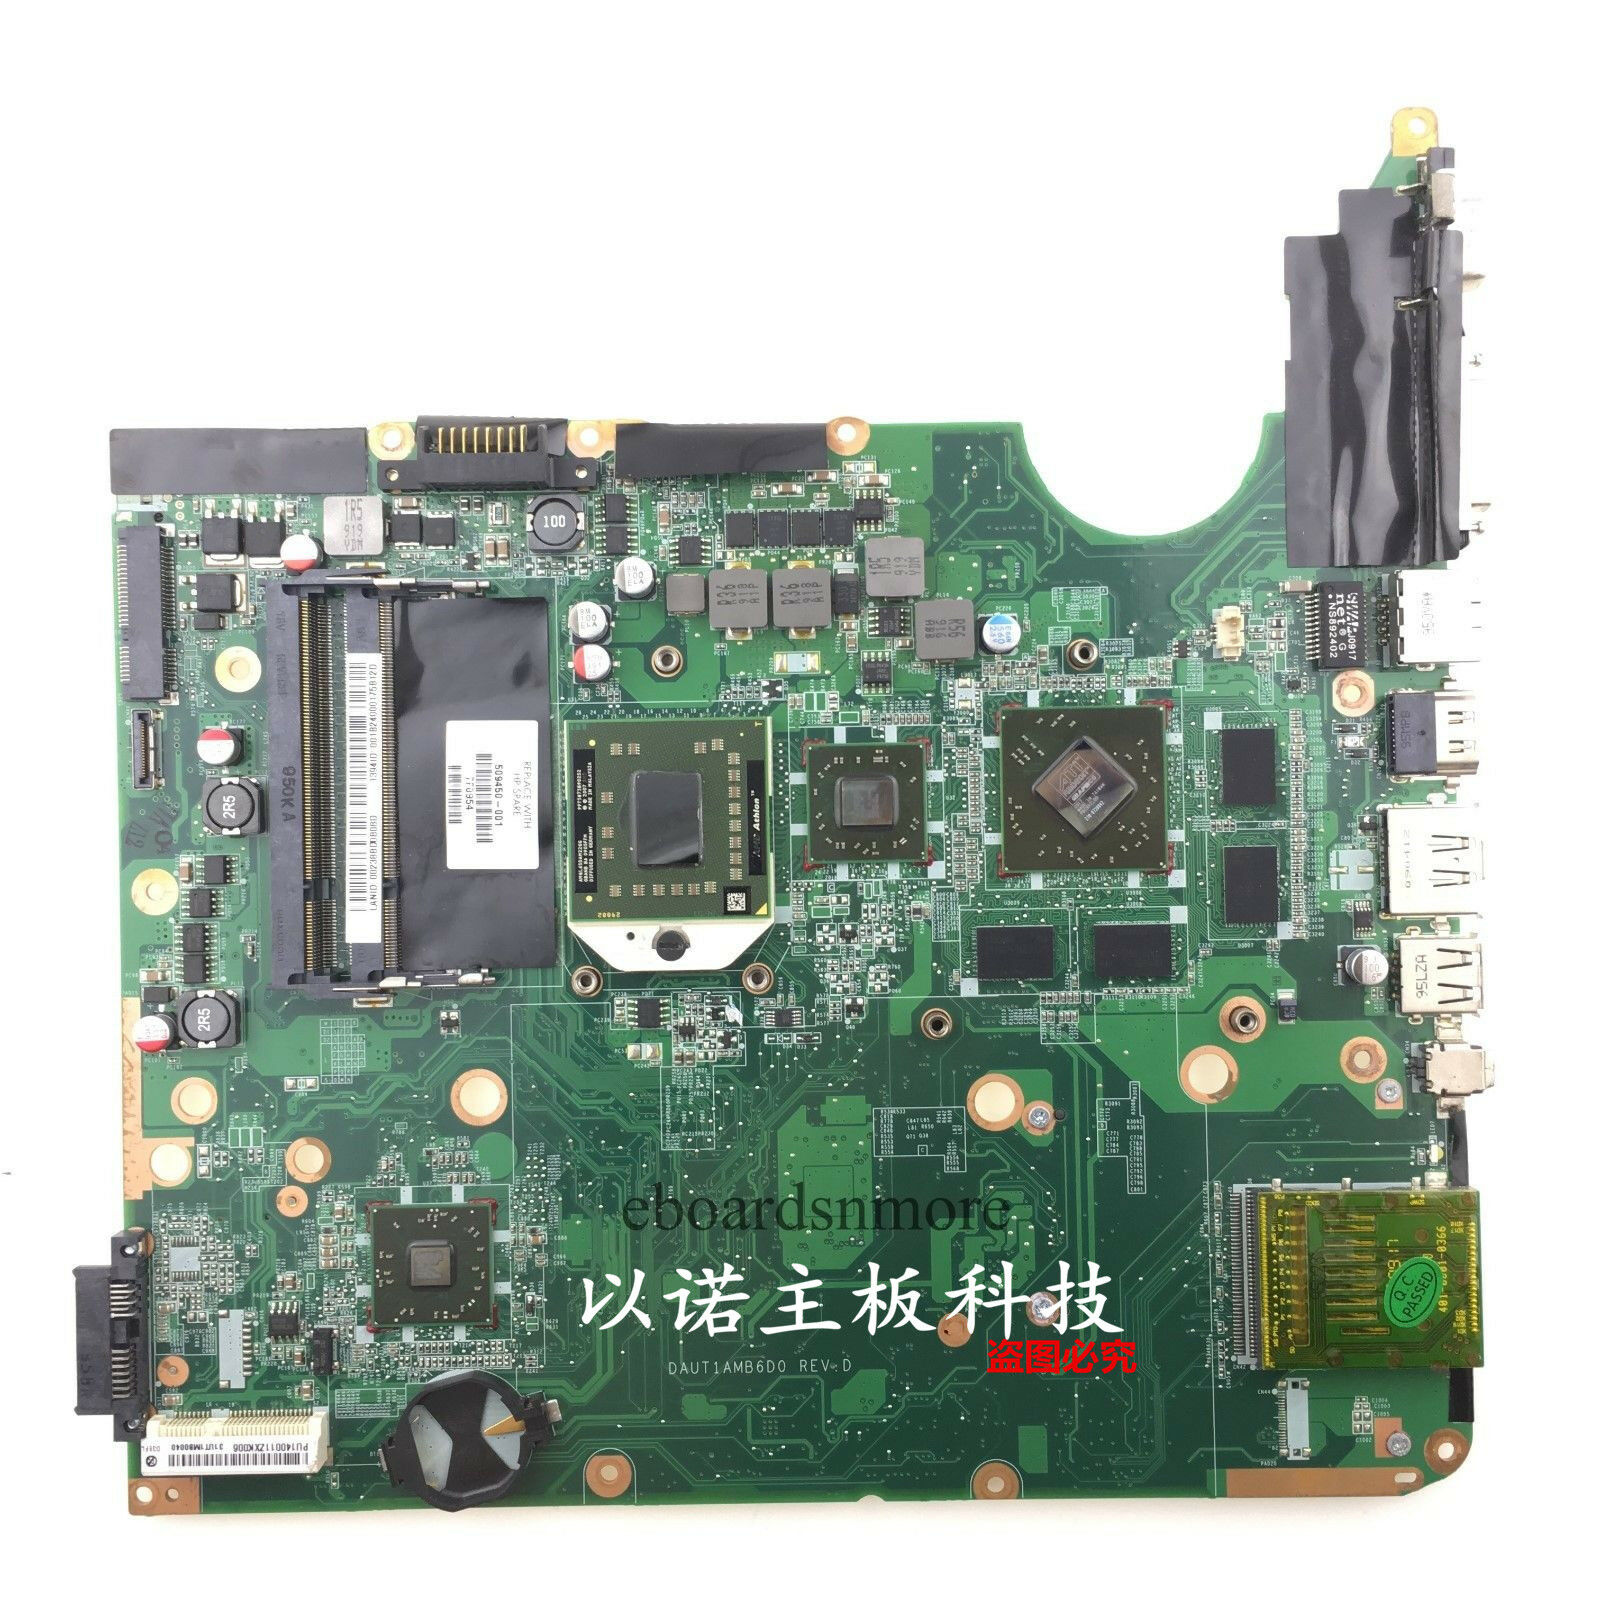 TESTED!!! HP DV6 2088DX 1264CA 1260SE 1268NR AMD MOTHERBOARD => 509450-001 Tracking Number is INCLUDED, and - Click Image to Close